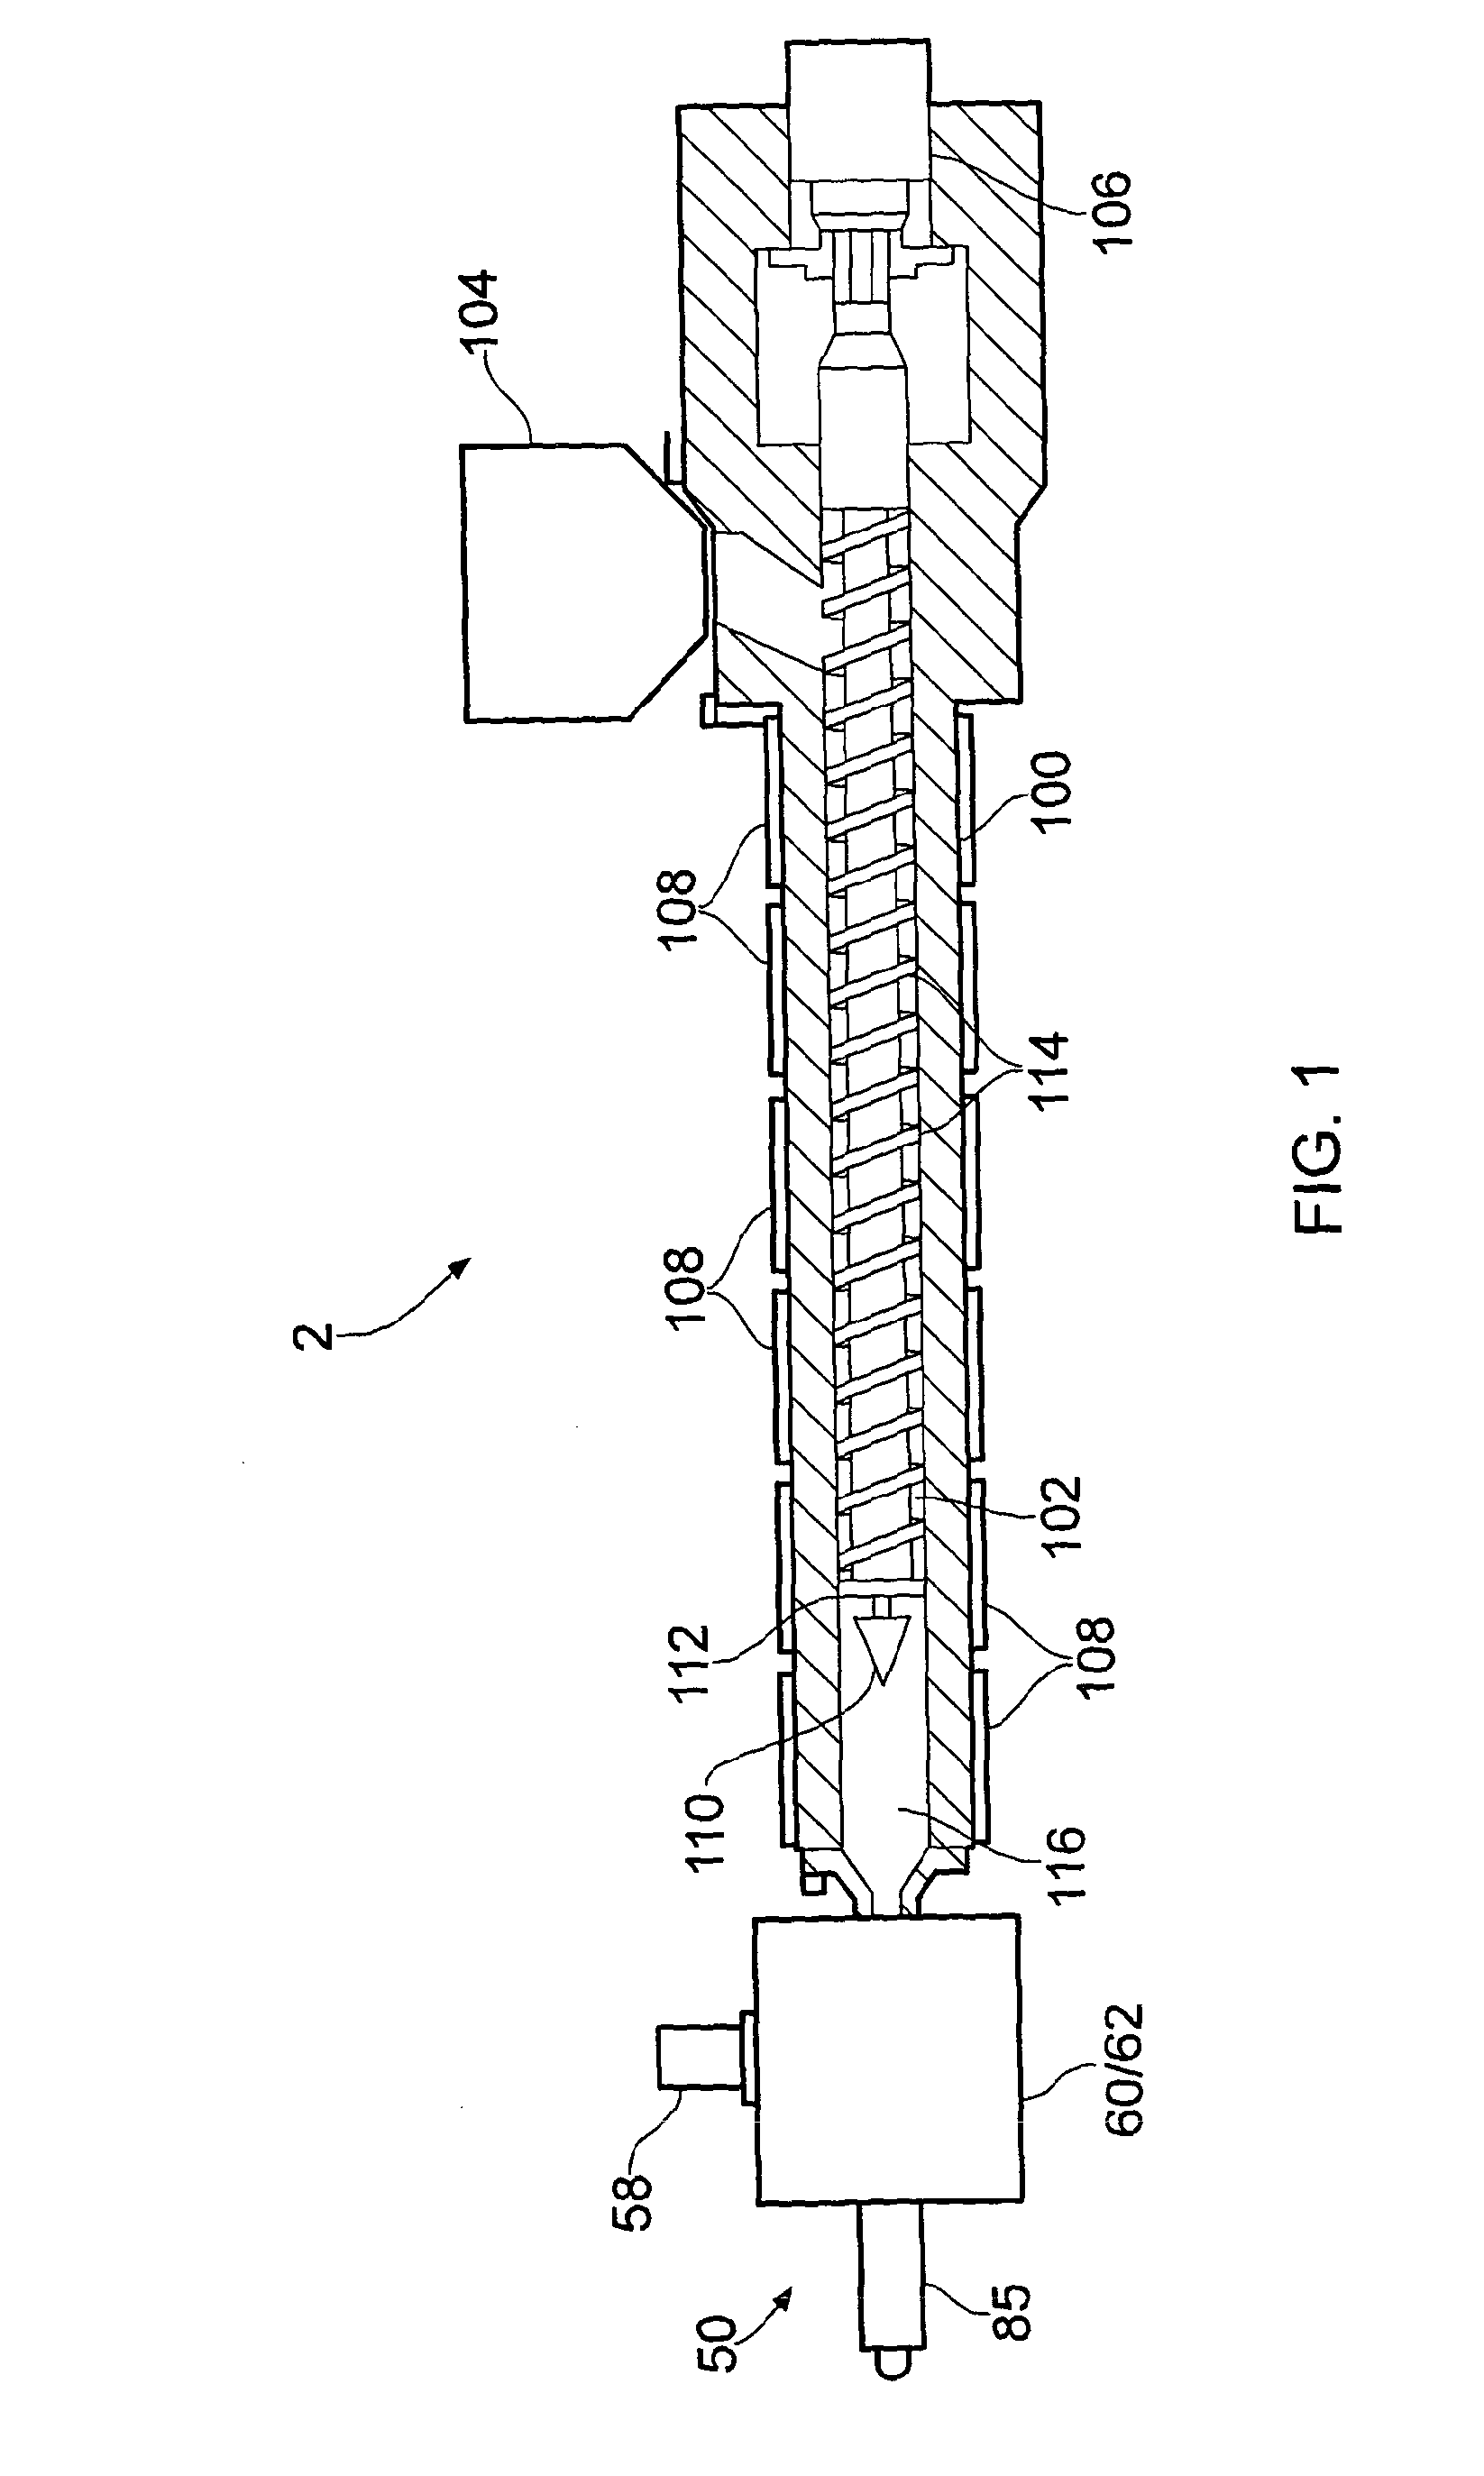 Methods and apparatus for processing polymers